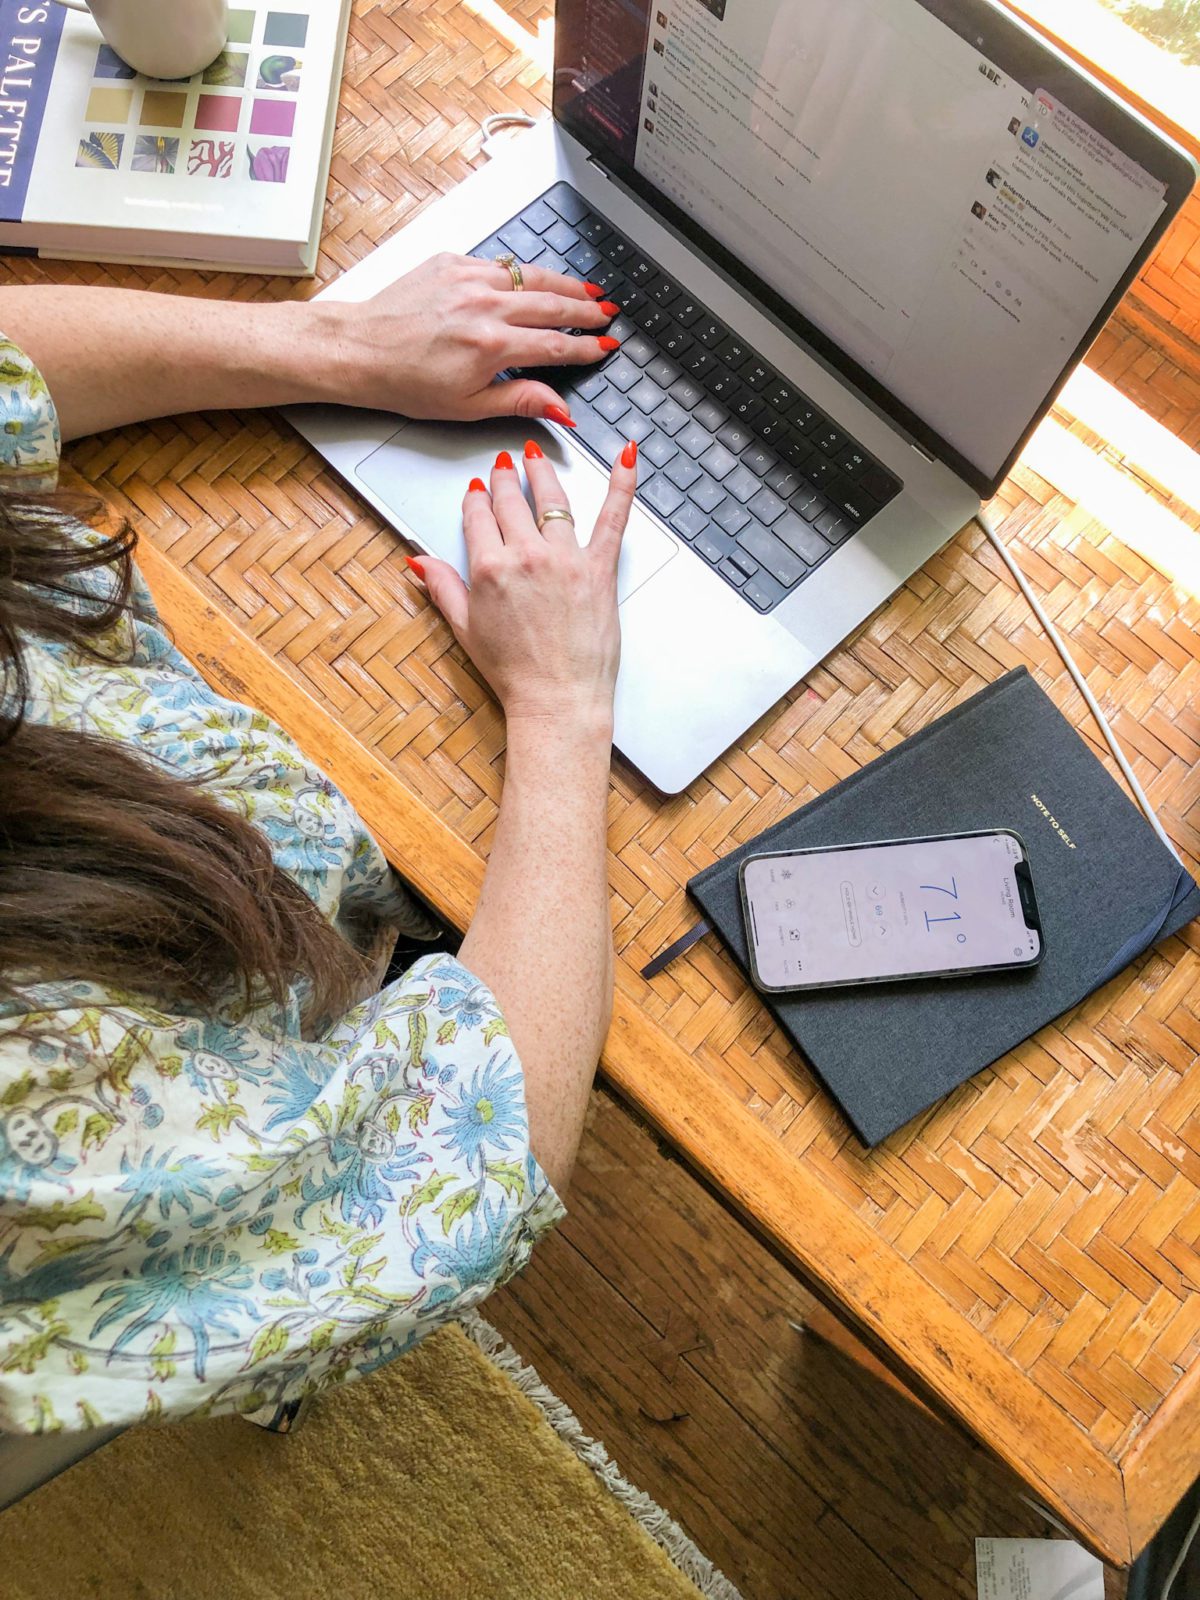 Woman working on a laptop with her smartphone next to her.